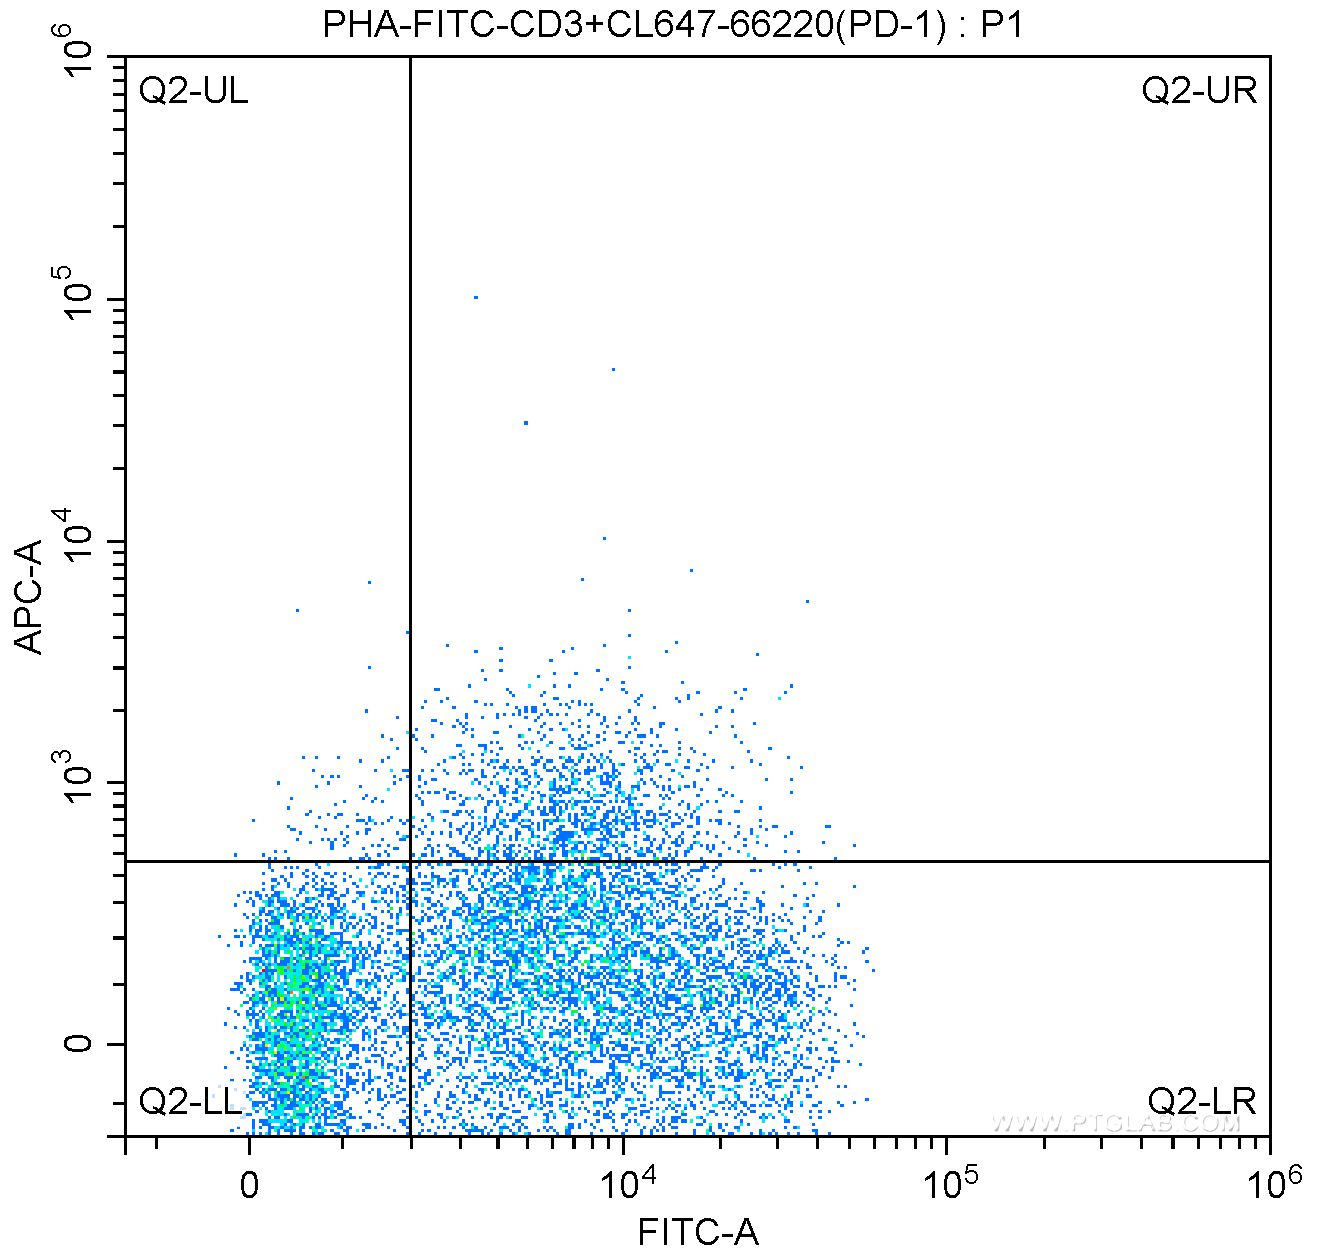 Flow cytometry (FC) experiment of PBMC using CoraLite® Plus 647-conjugated PD-1/CD279 Monoclona (CL647-66220)